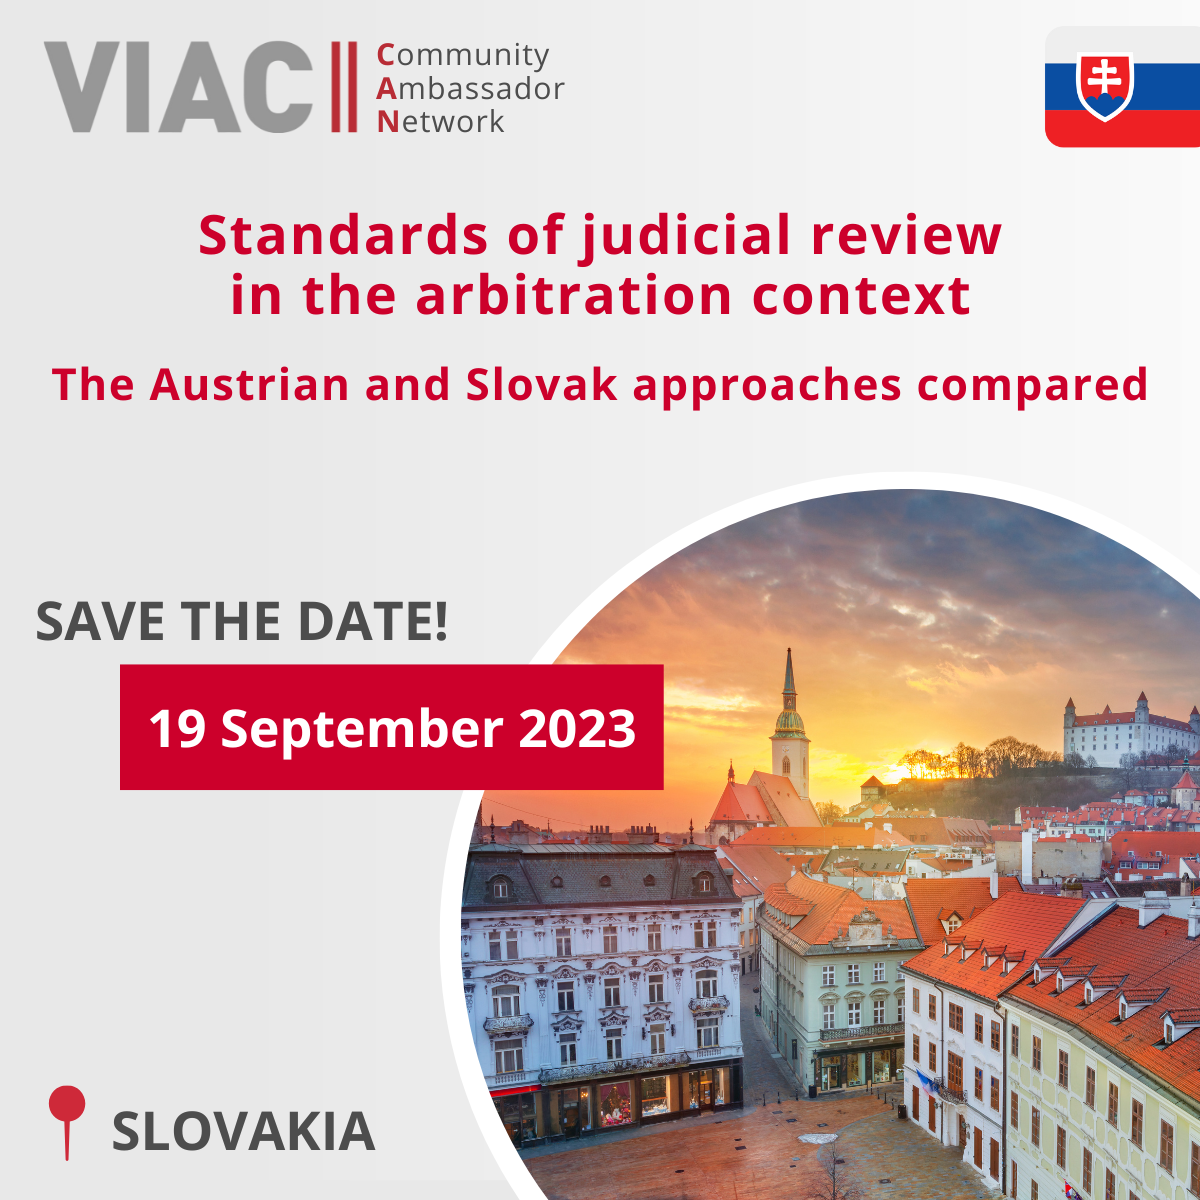 VIAC CAN Event "Standards of judicial review in the arbitration context" on 19 September 2023 - Save the Date